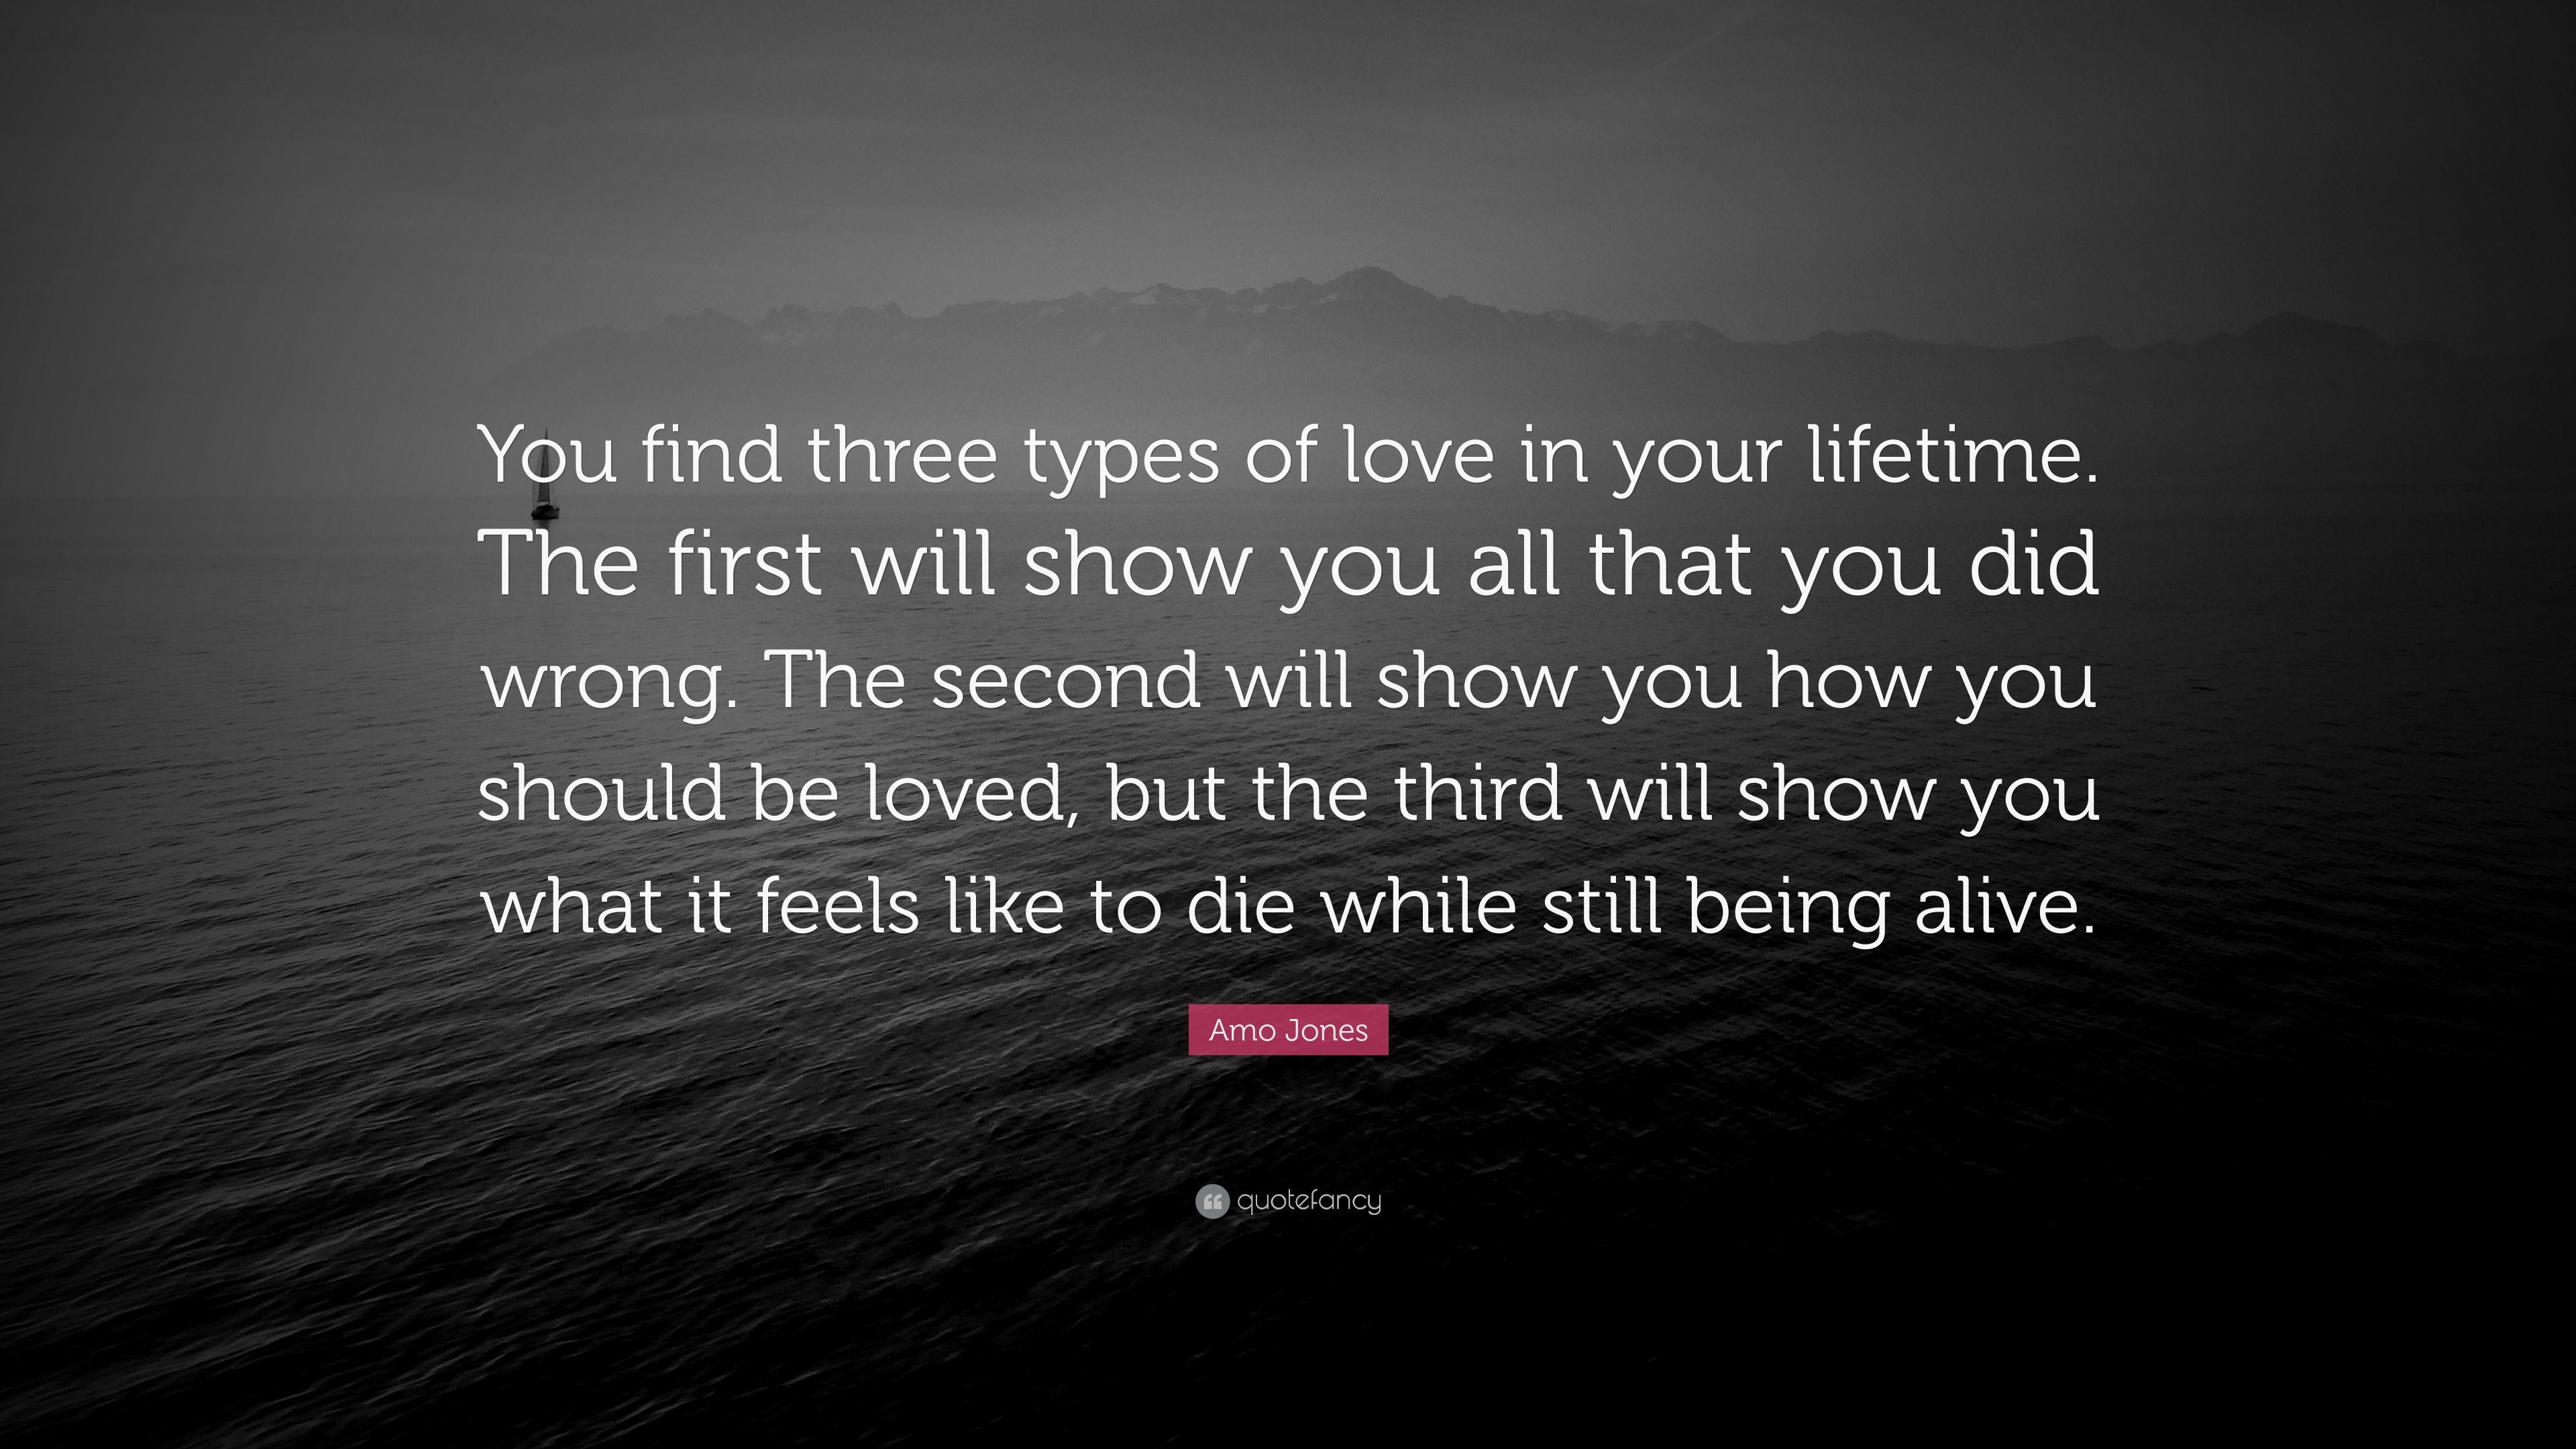 Amo Jones Quote: “You find three types of love in your lifetime. The first  will show you all that you did wrong. The second will show you ”